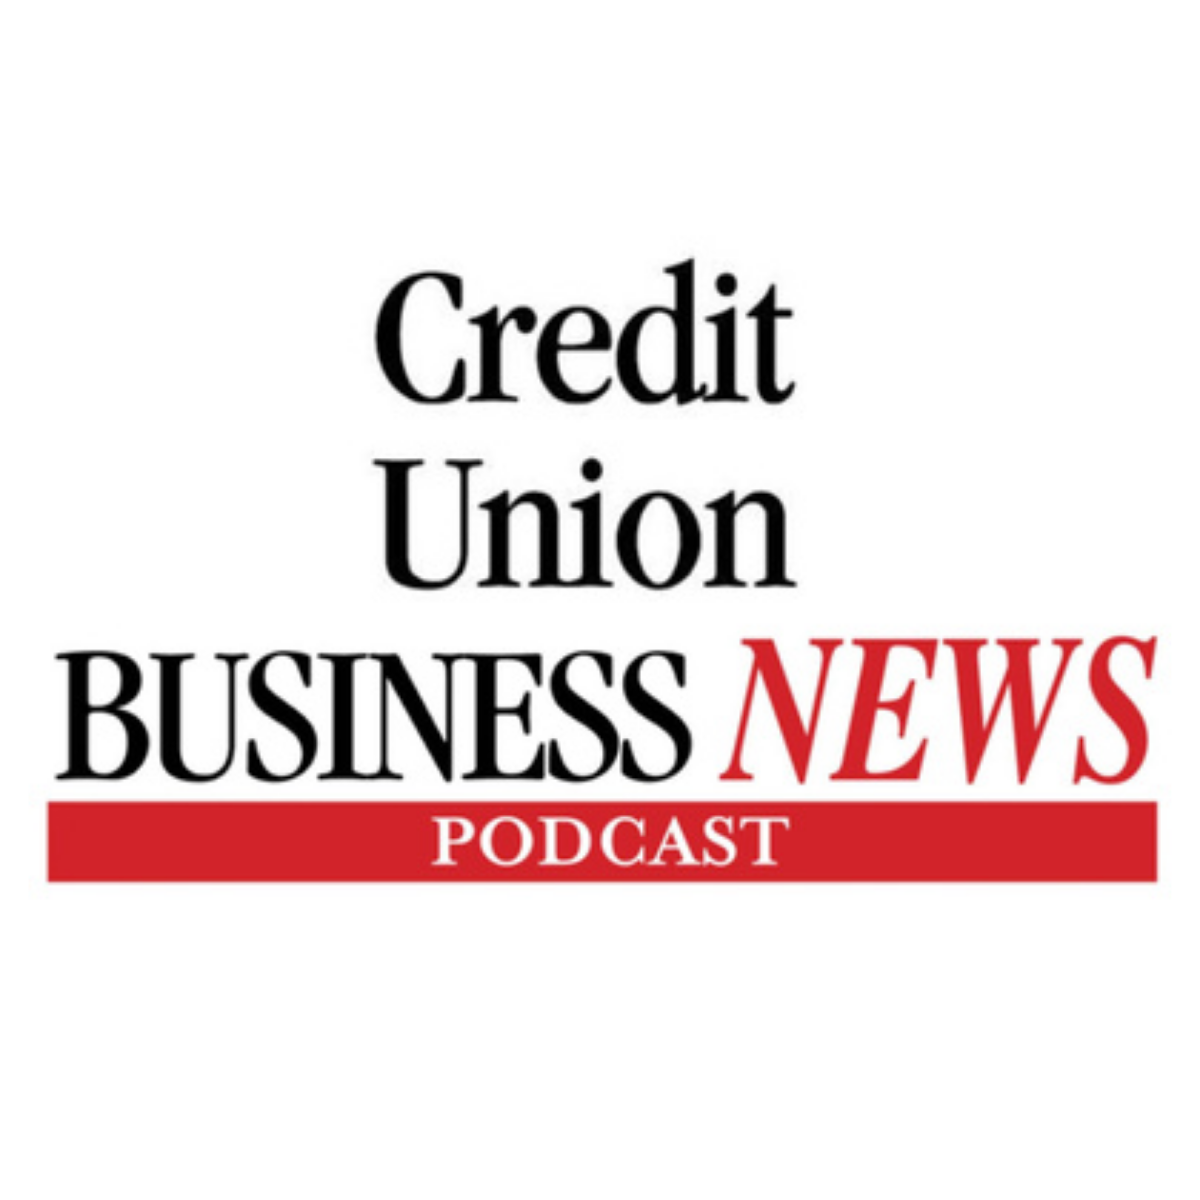 Credit Union Business News Podcast